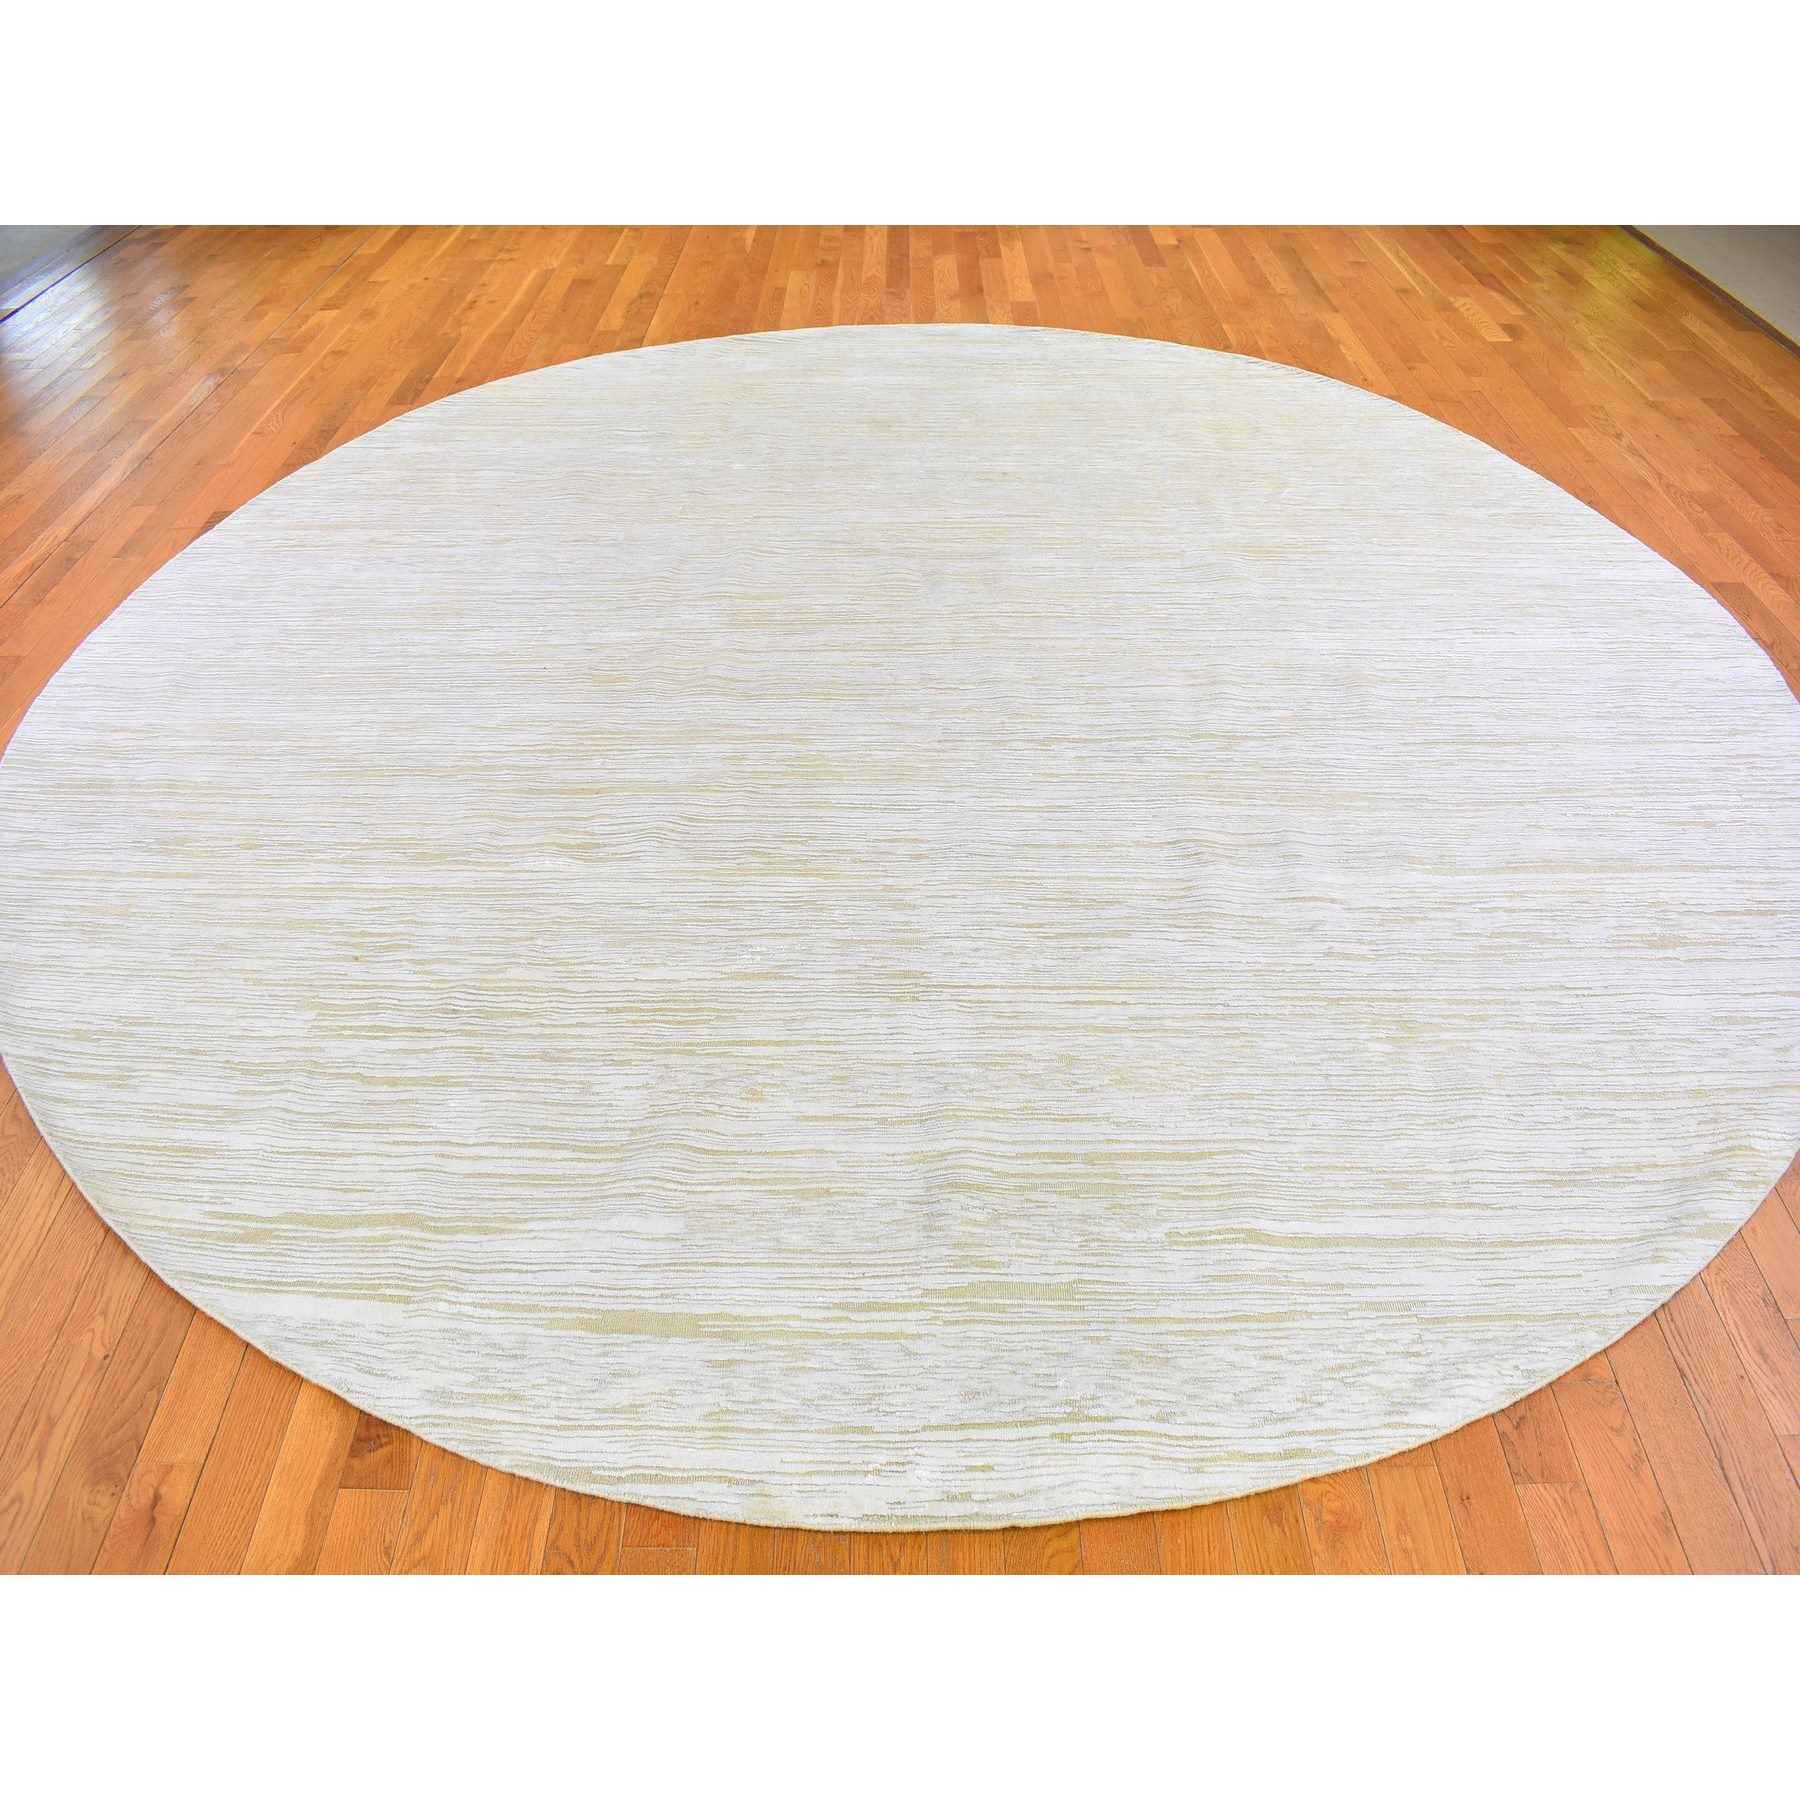 12'x12' Gabbeh Design Hand Woven Ivory Silk with Textured Wool Tone on Tone Hi-Low Pile Round Oriental Rug 